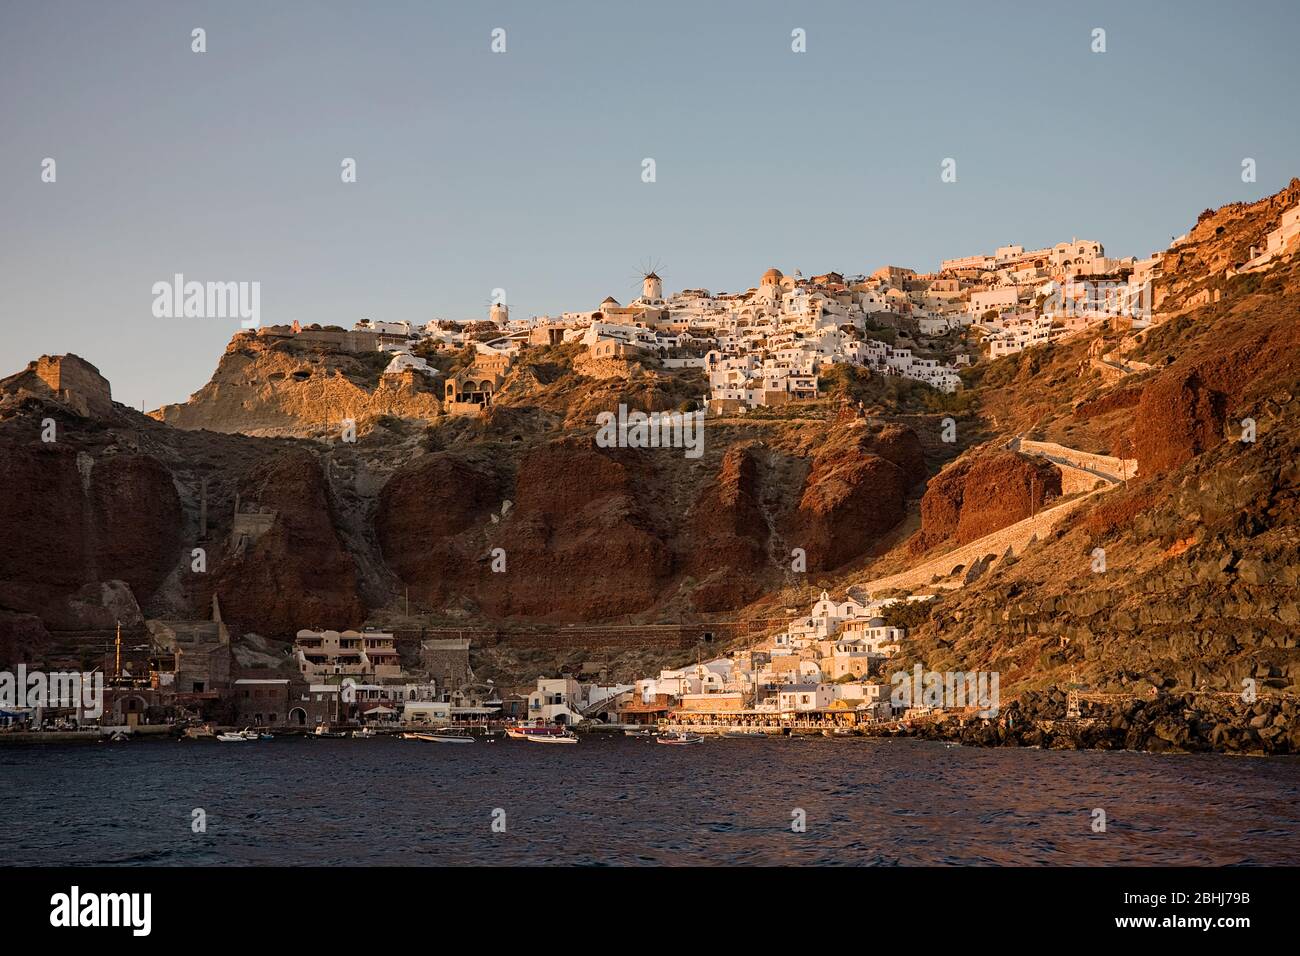 Old harbor of Fira, Santorini, Cyclades islands, Greece, Southern Europe Stock Photo